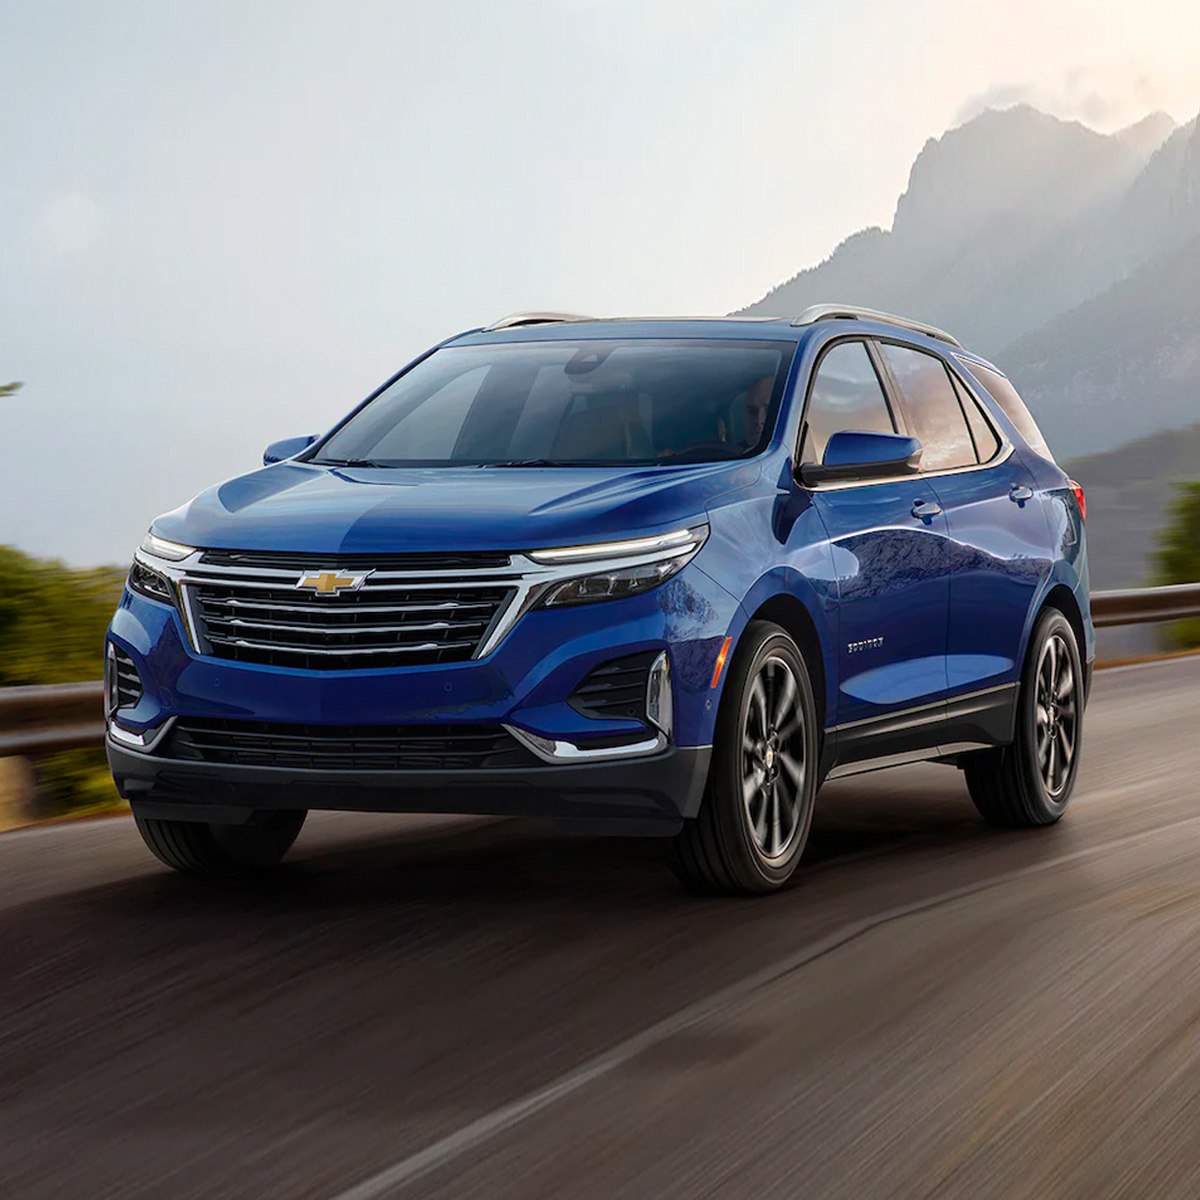 2022 Chevrolet Equinox driving down a country road